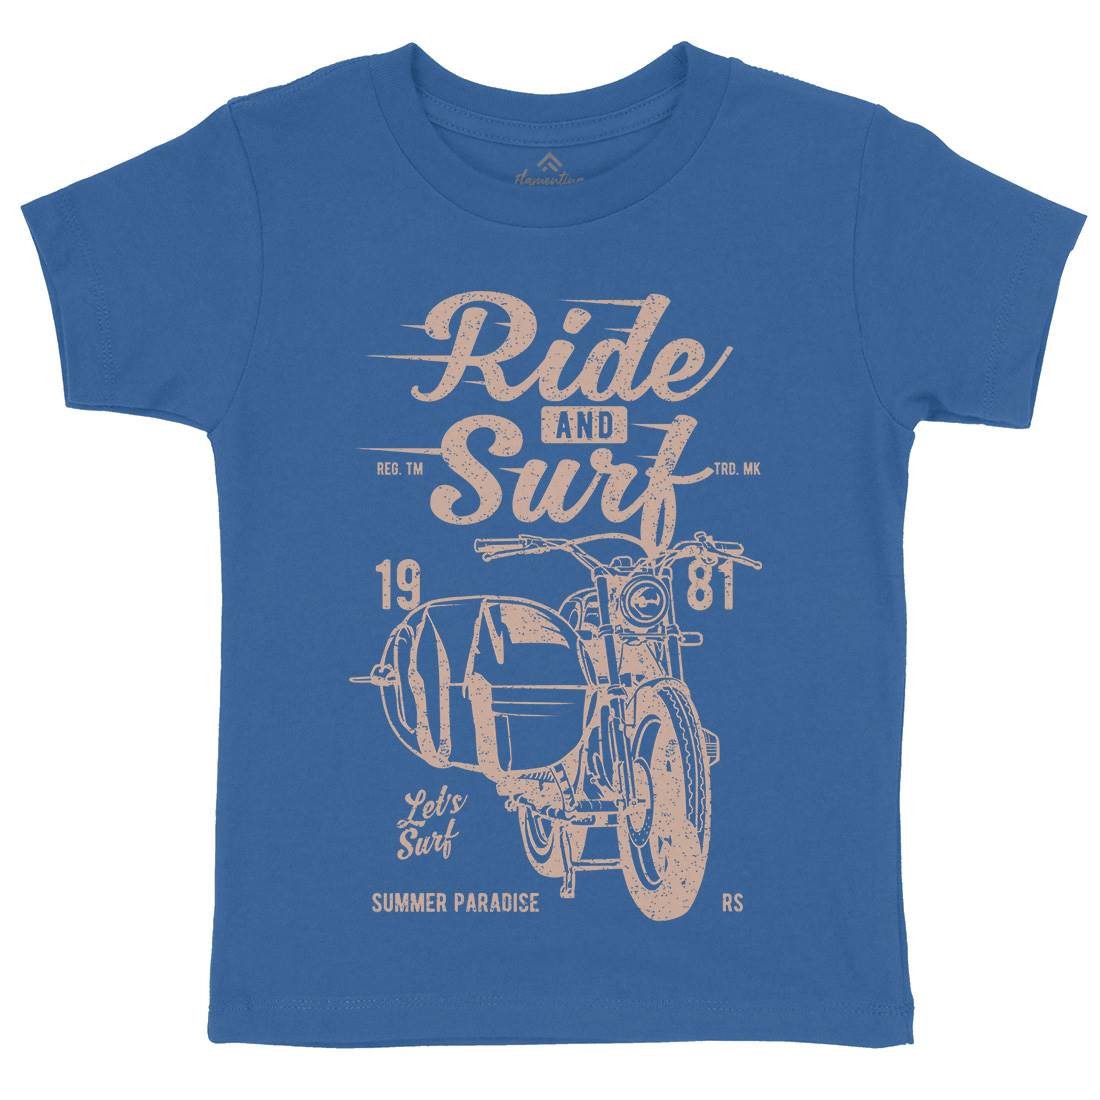 Ride And Kids Crew Neck T-Shirt Surf A742